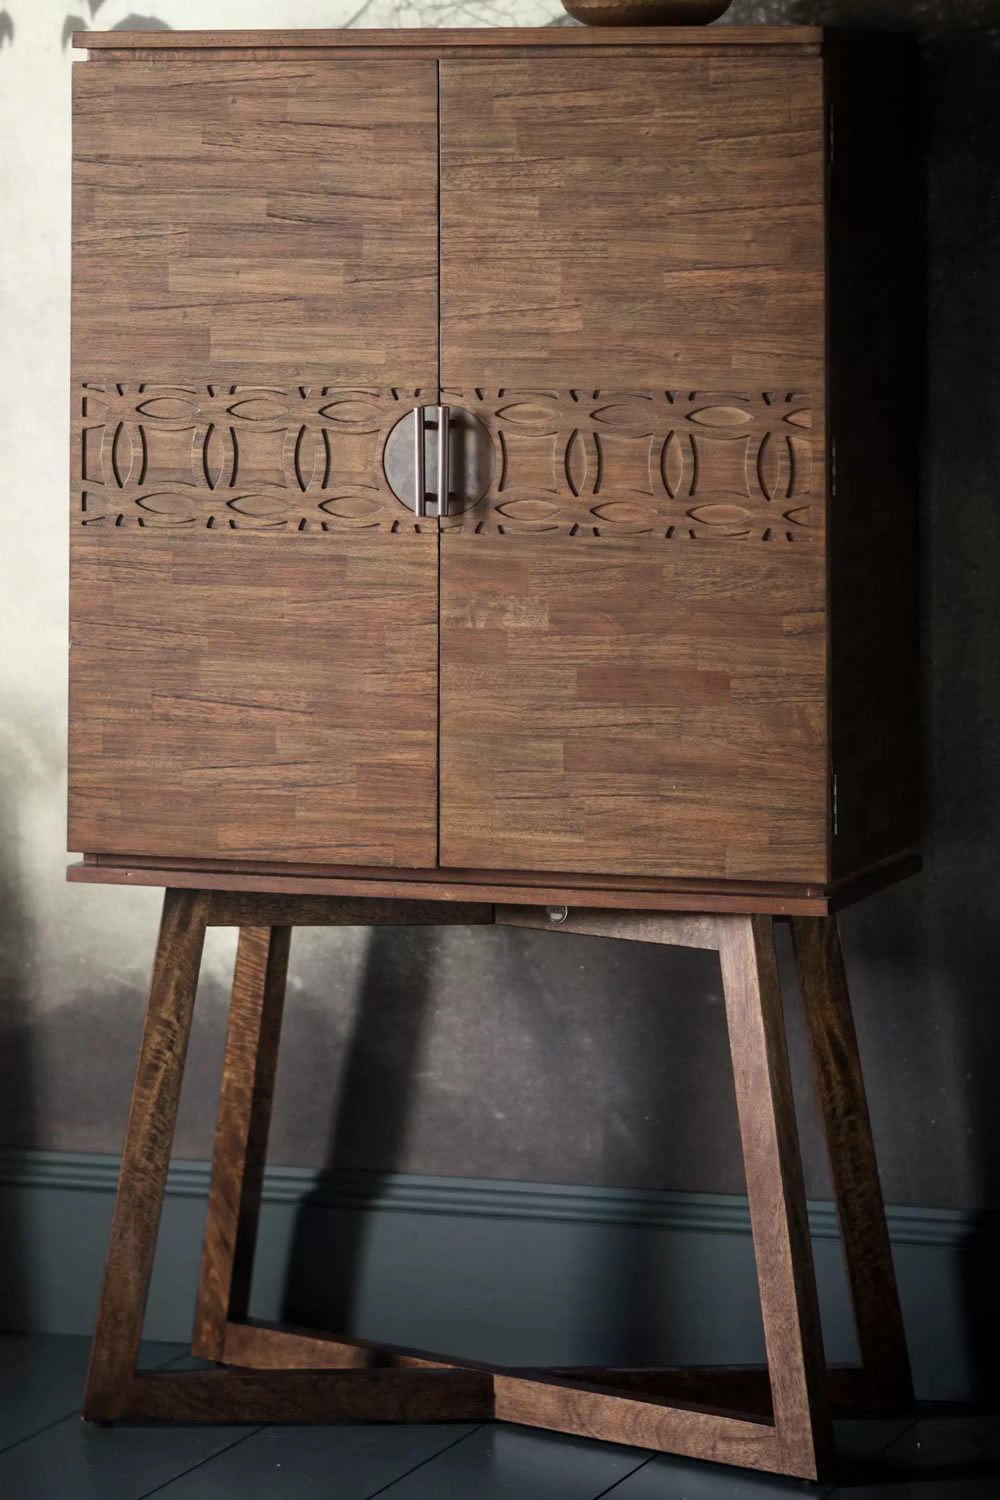 View Boho Brown Wooden Dining Room Cocktail Cabinet Crafted From Mango Wood Timber Veneers MDF 2 Storage Shelves Glass Mirrored Back Fretwork Do information